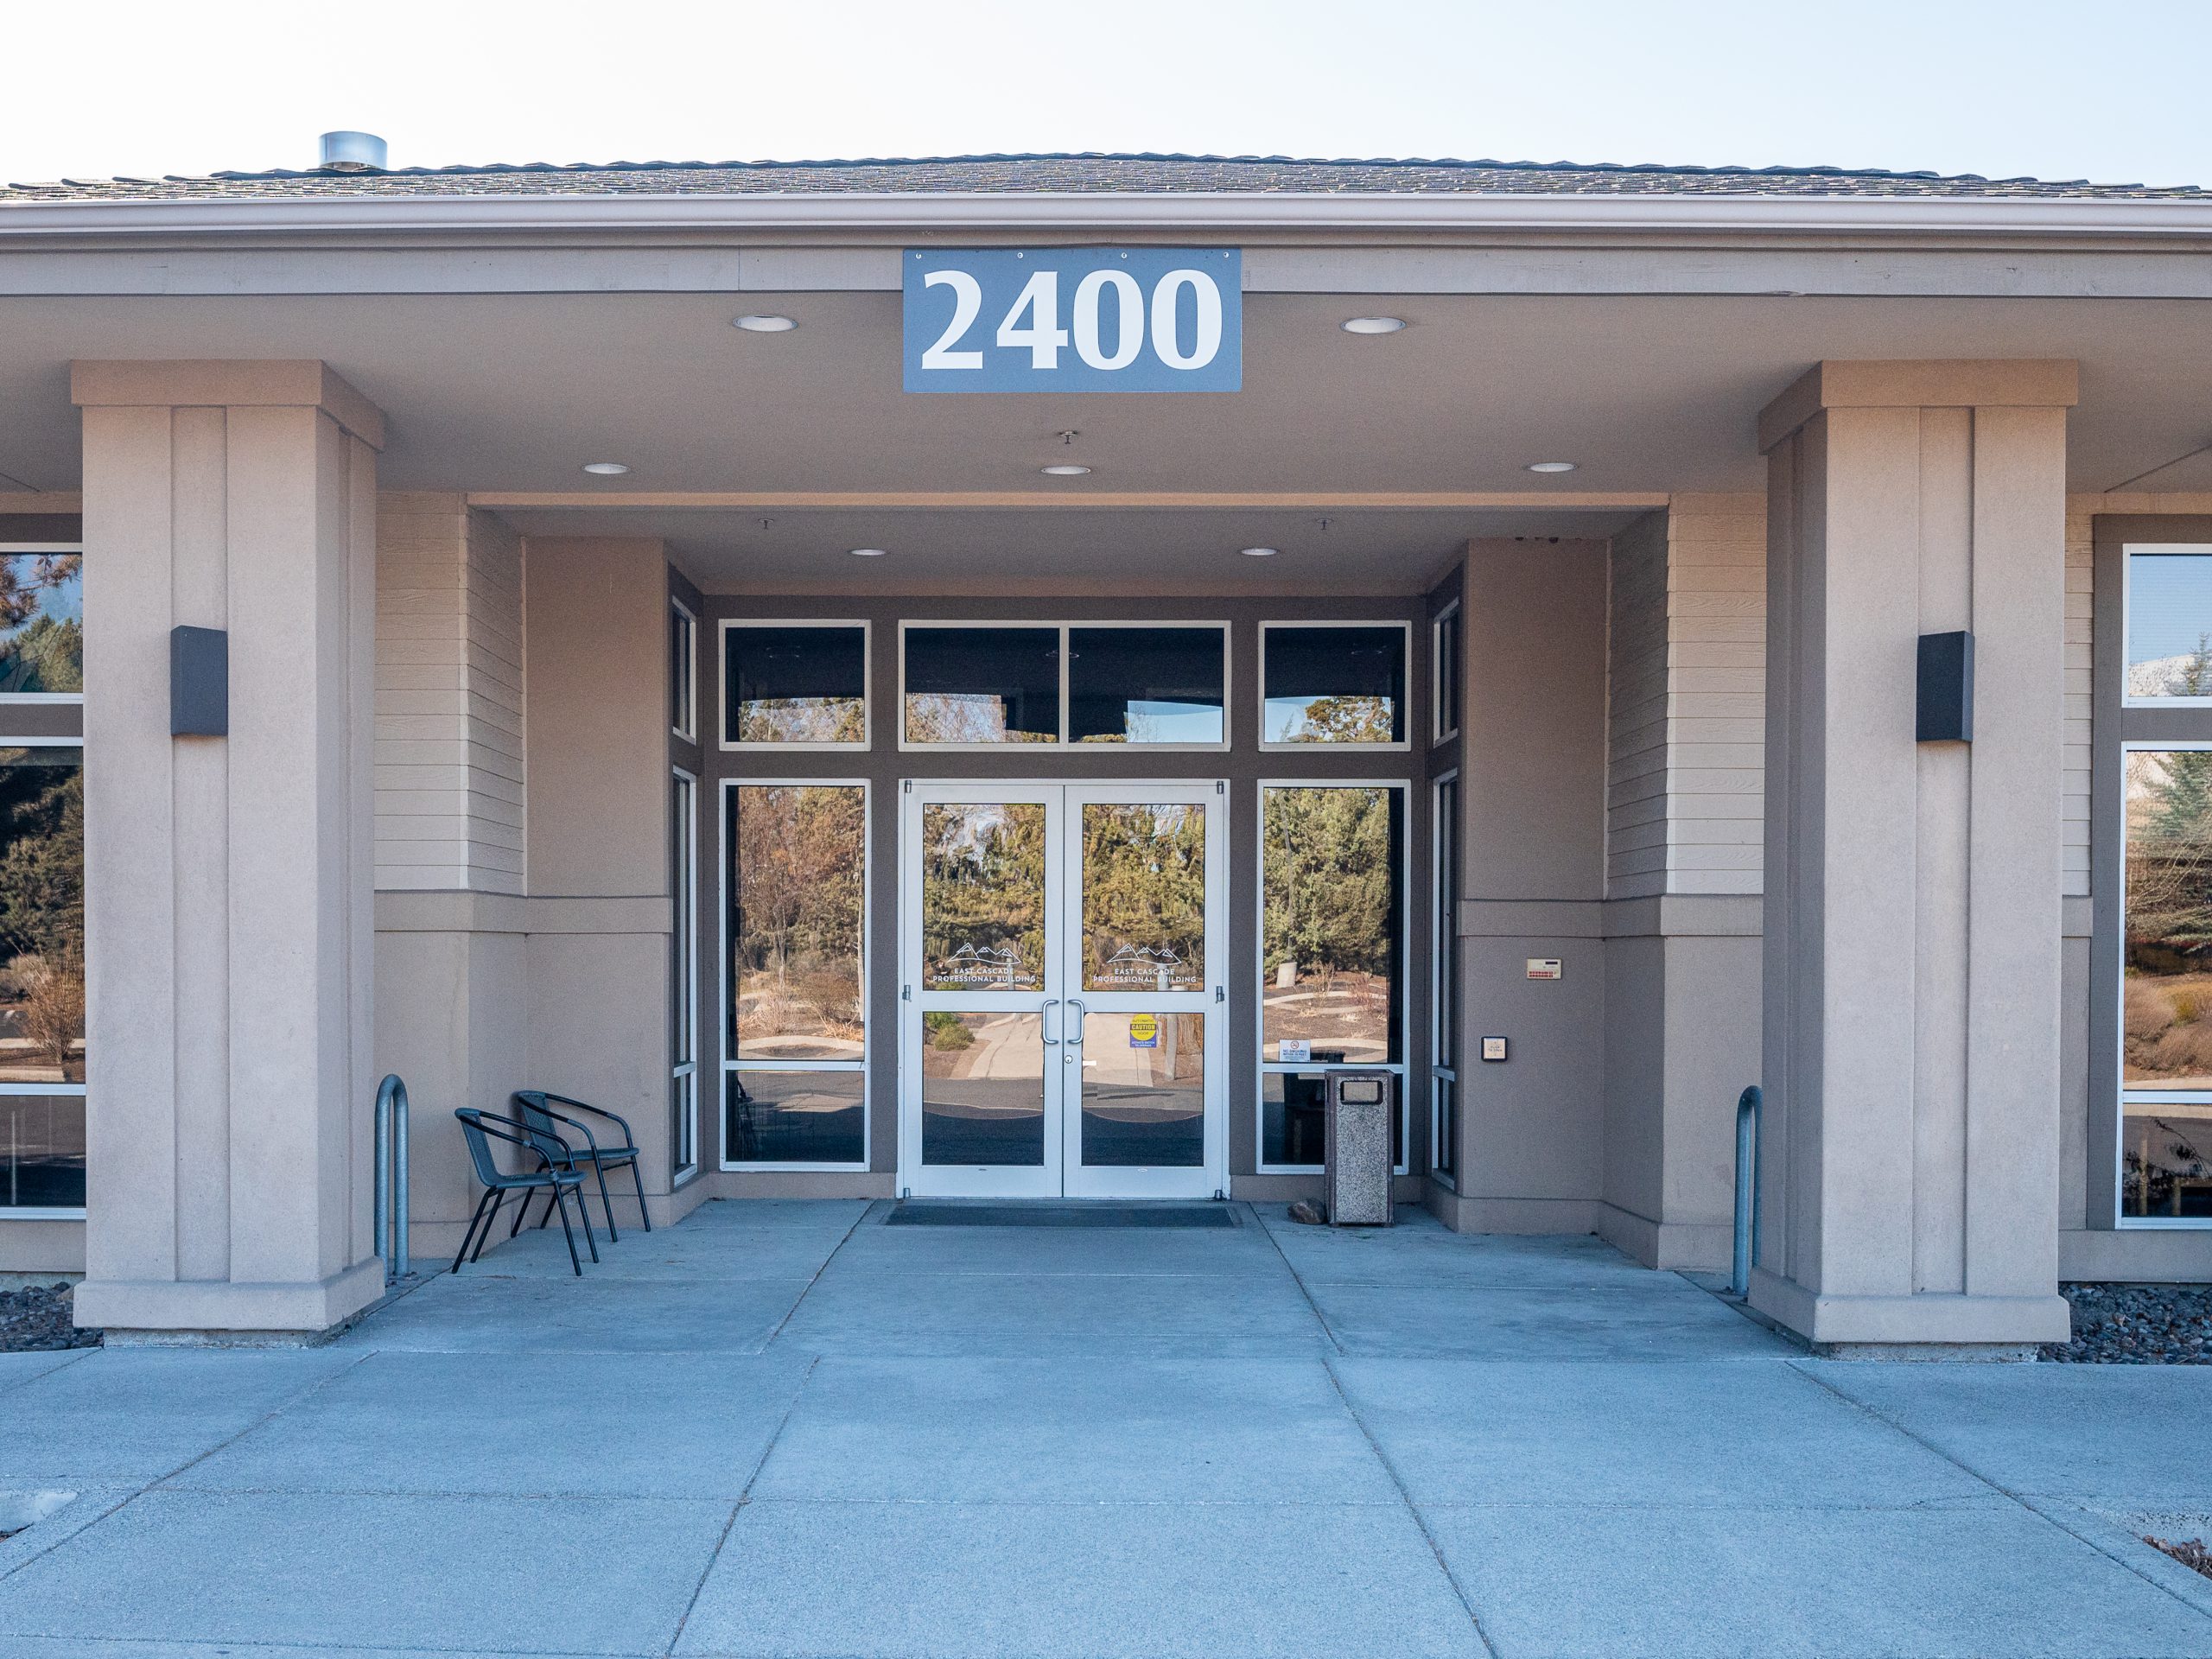 Front doors of clinic with the address of 2400 above the doors